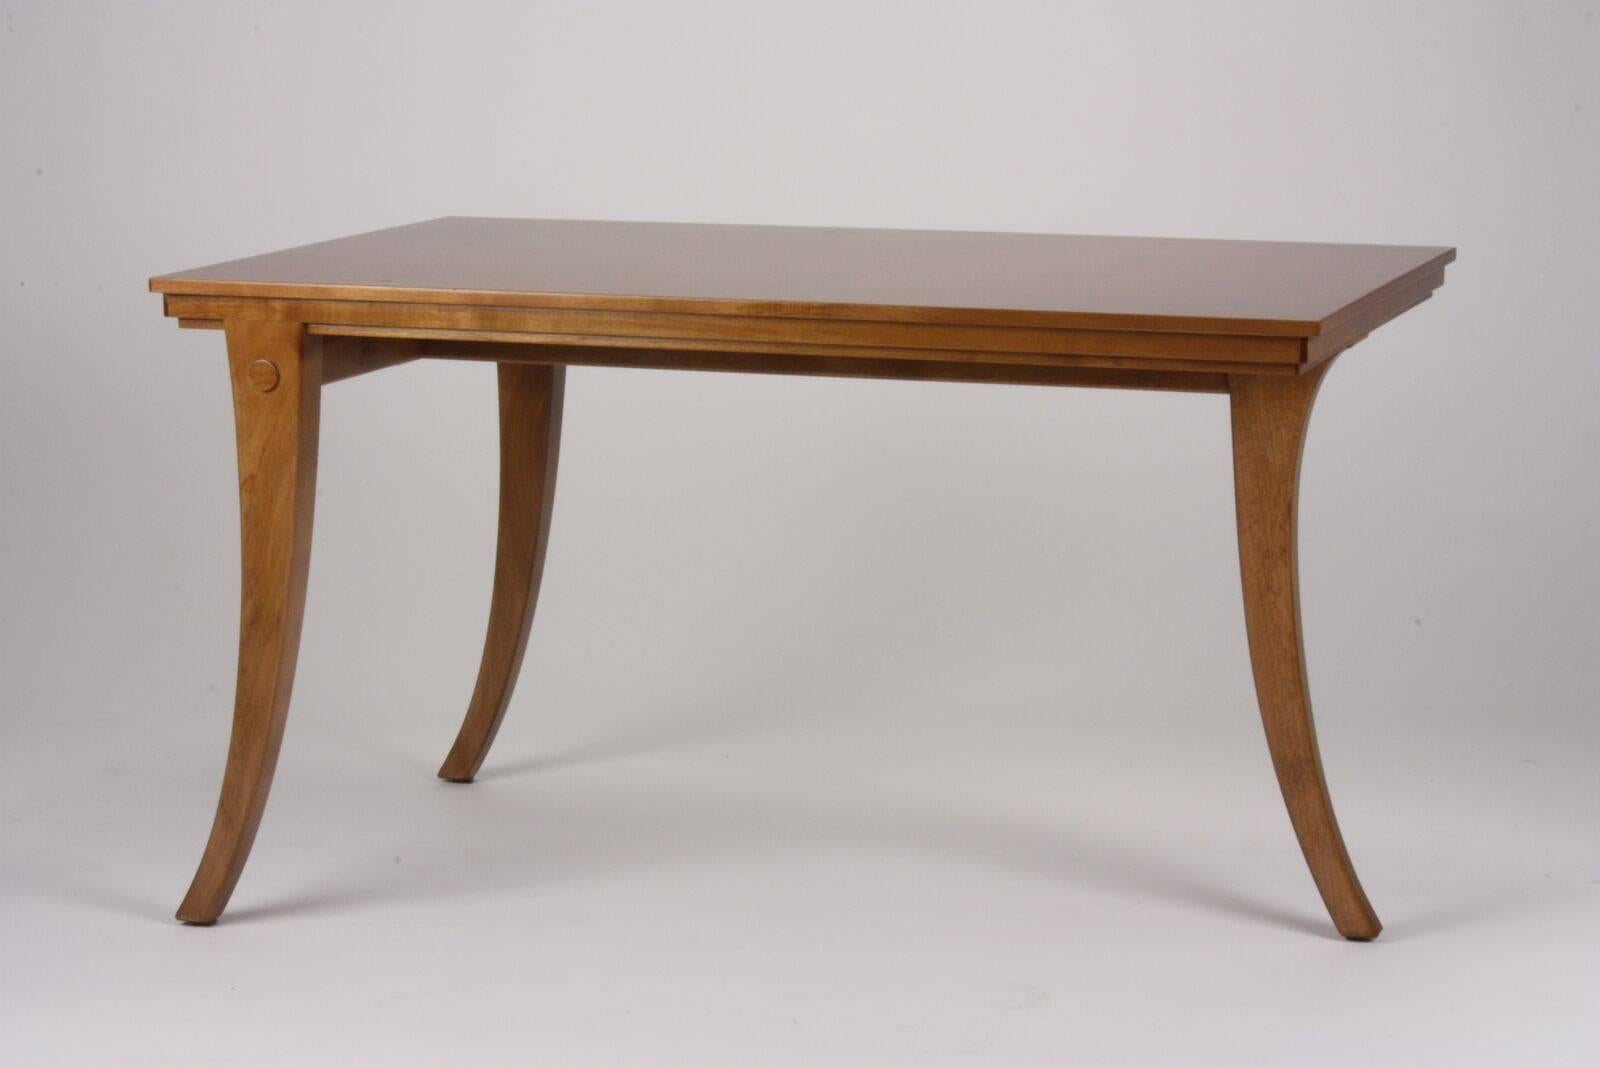 T.H Robsjohn-Gibbings for Saridis of Athens table Model No. 12. Made of Greek walnut with three legs joined by stretchers.

Each piece is custom ordered with a 90 day lead time. 

Emily Summers Studio 54 is the exclusive dealer for Saridis of